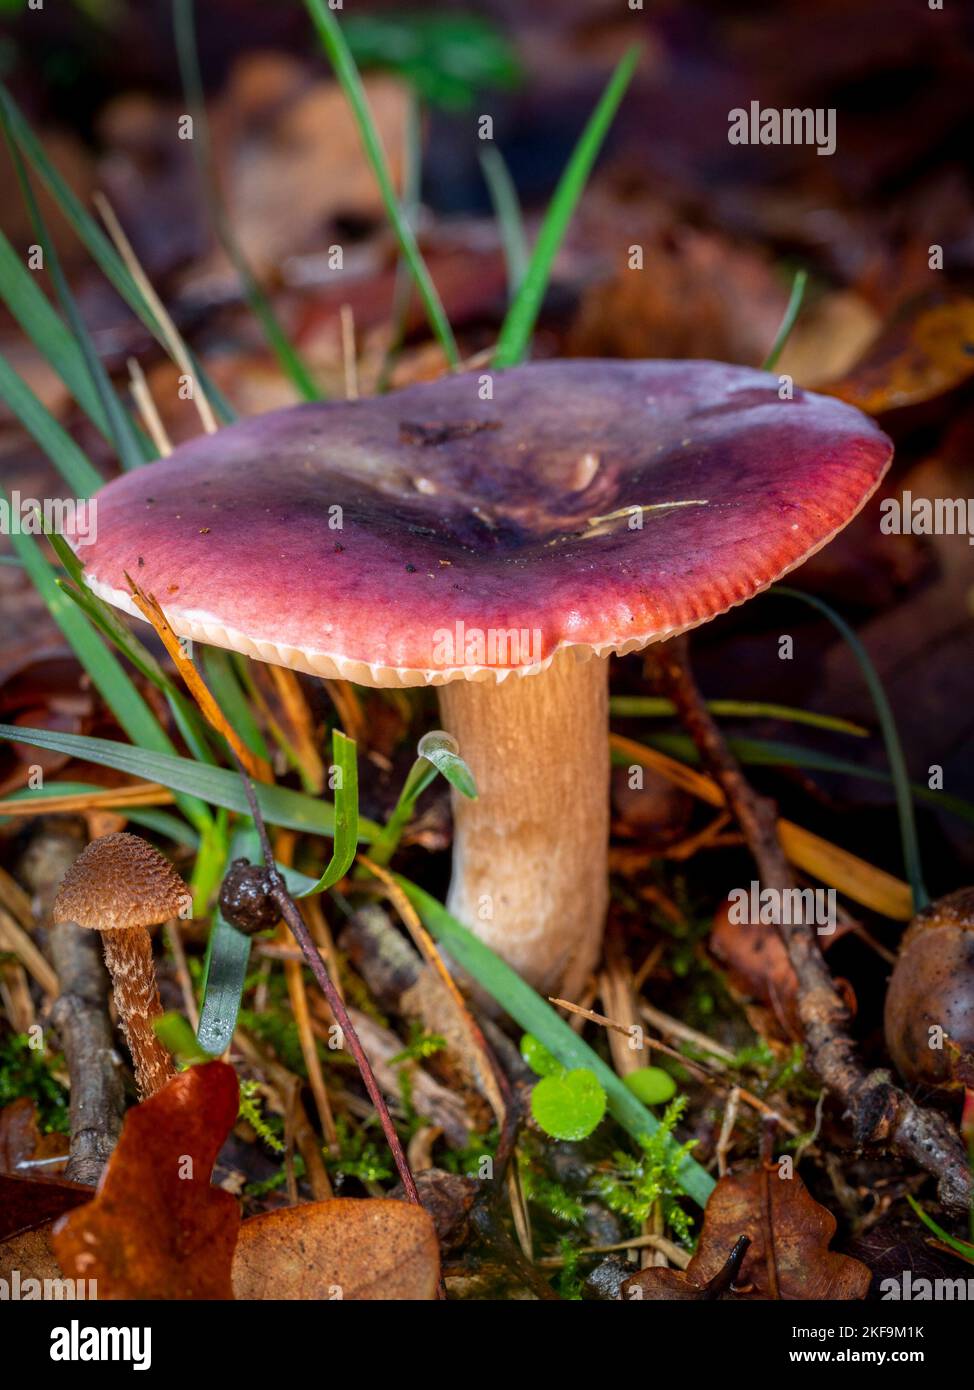 selective focus of a russula mushroom on a forest floor with blurred background Stock Photo